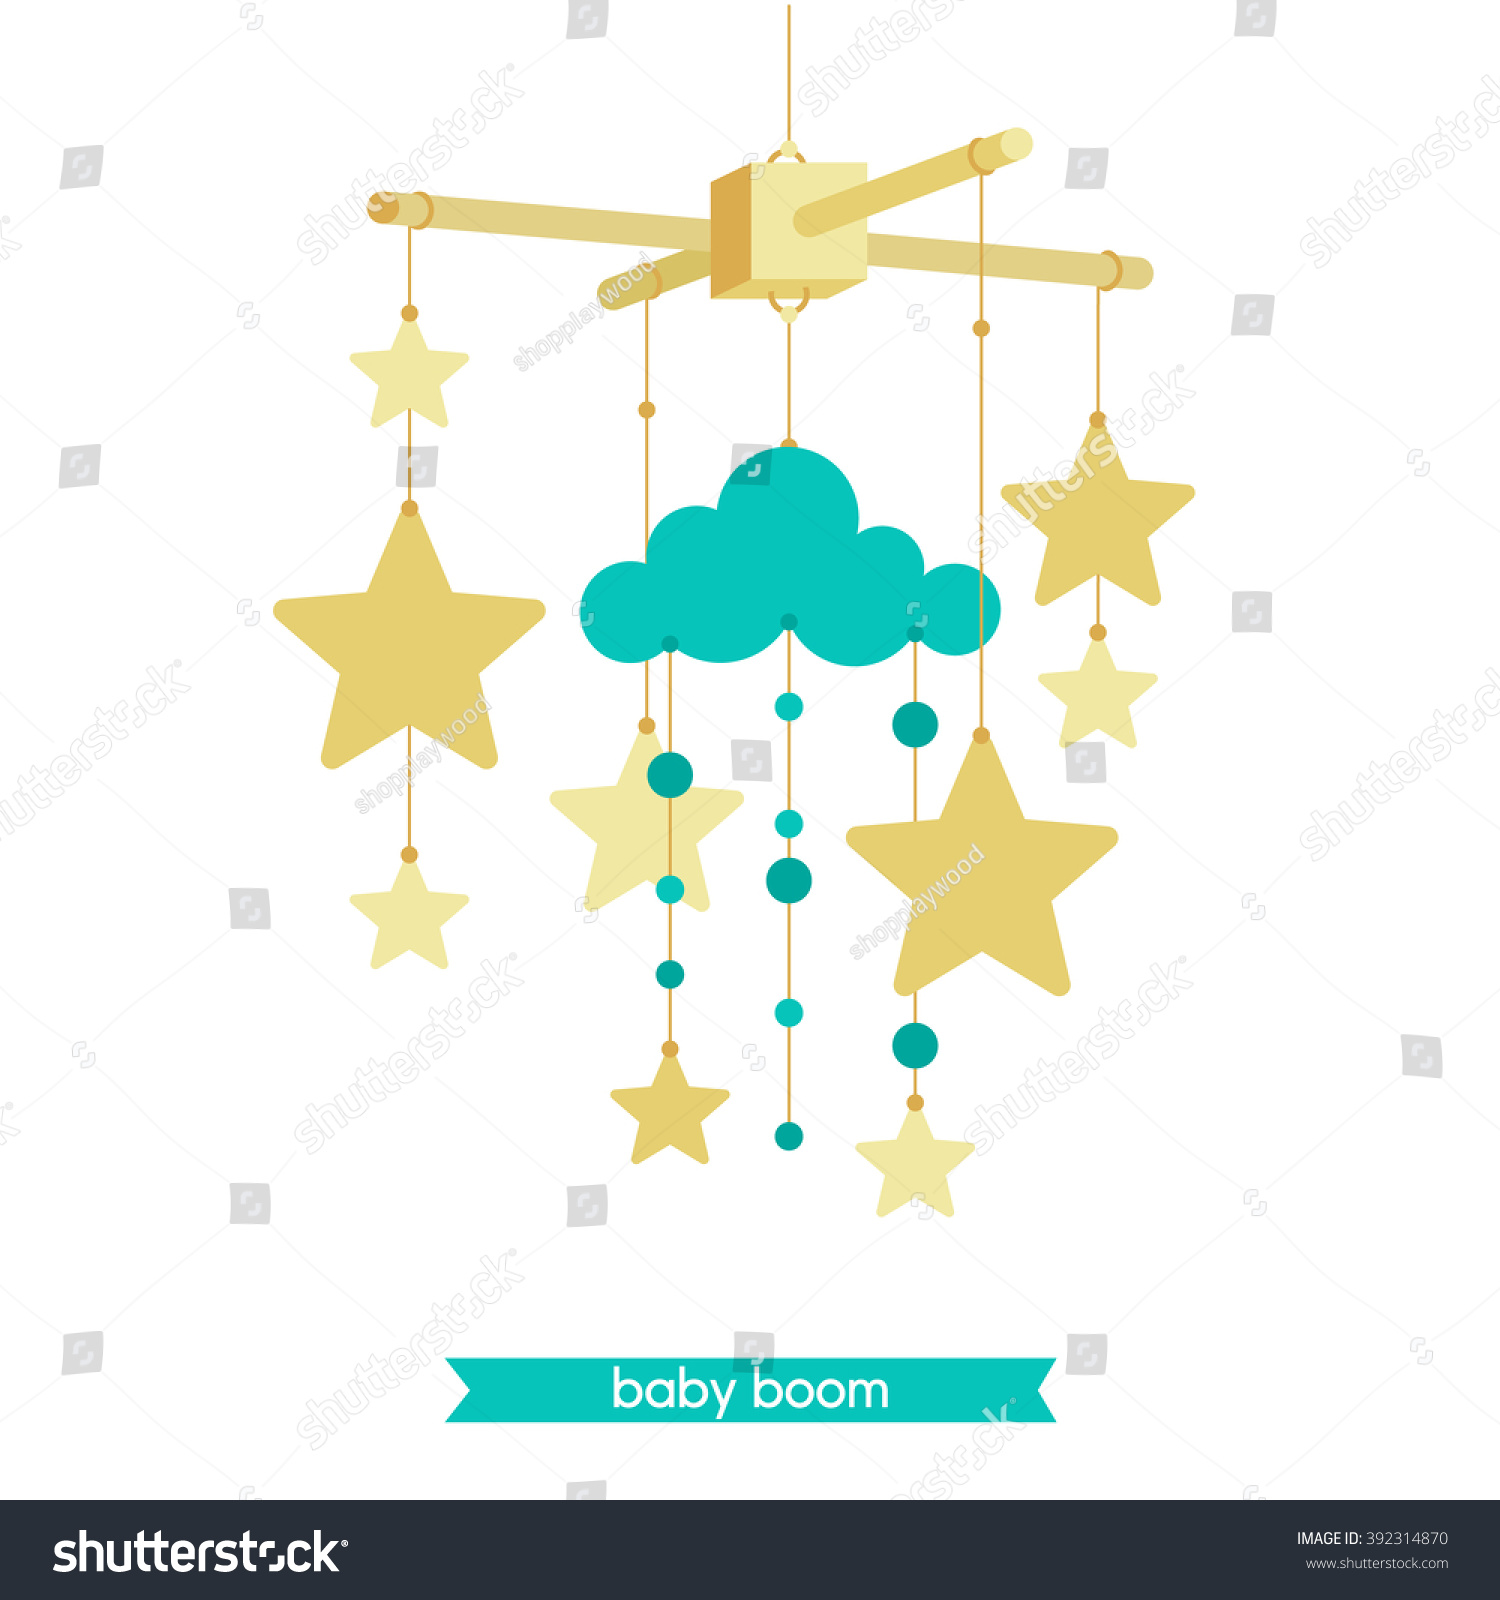 baby mobile clipart - photo #14